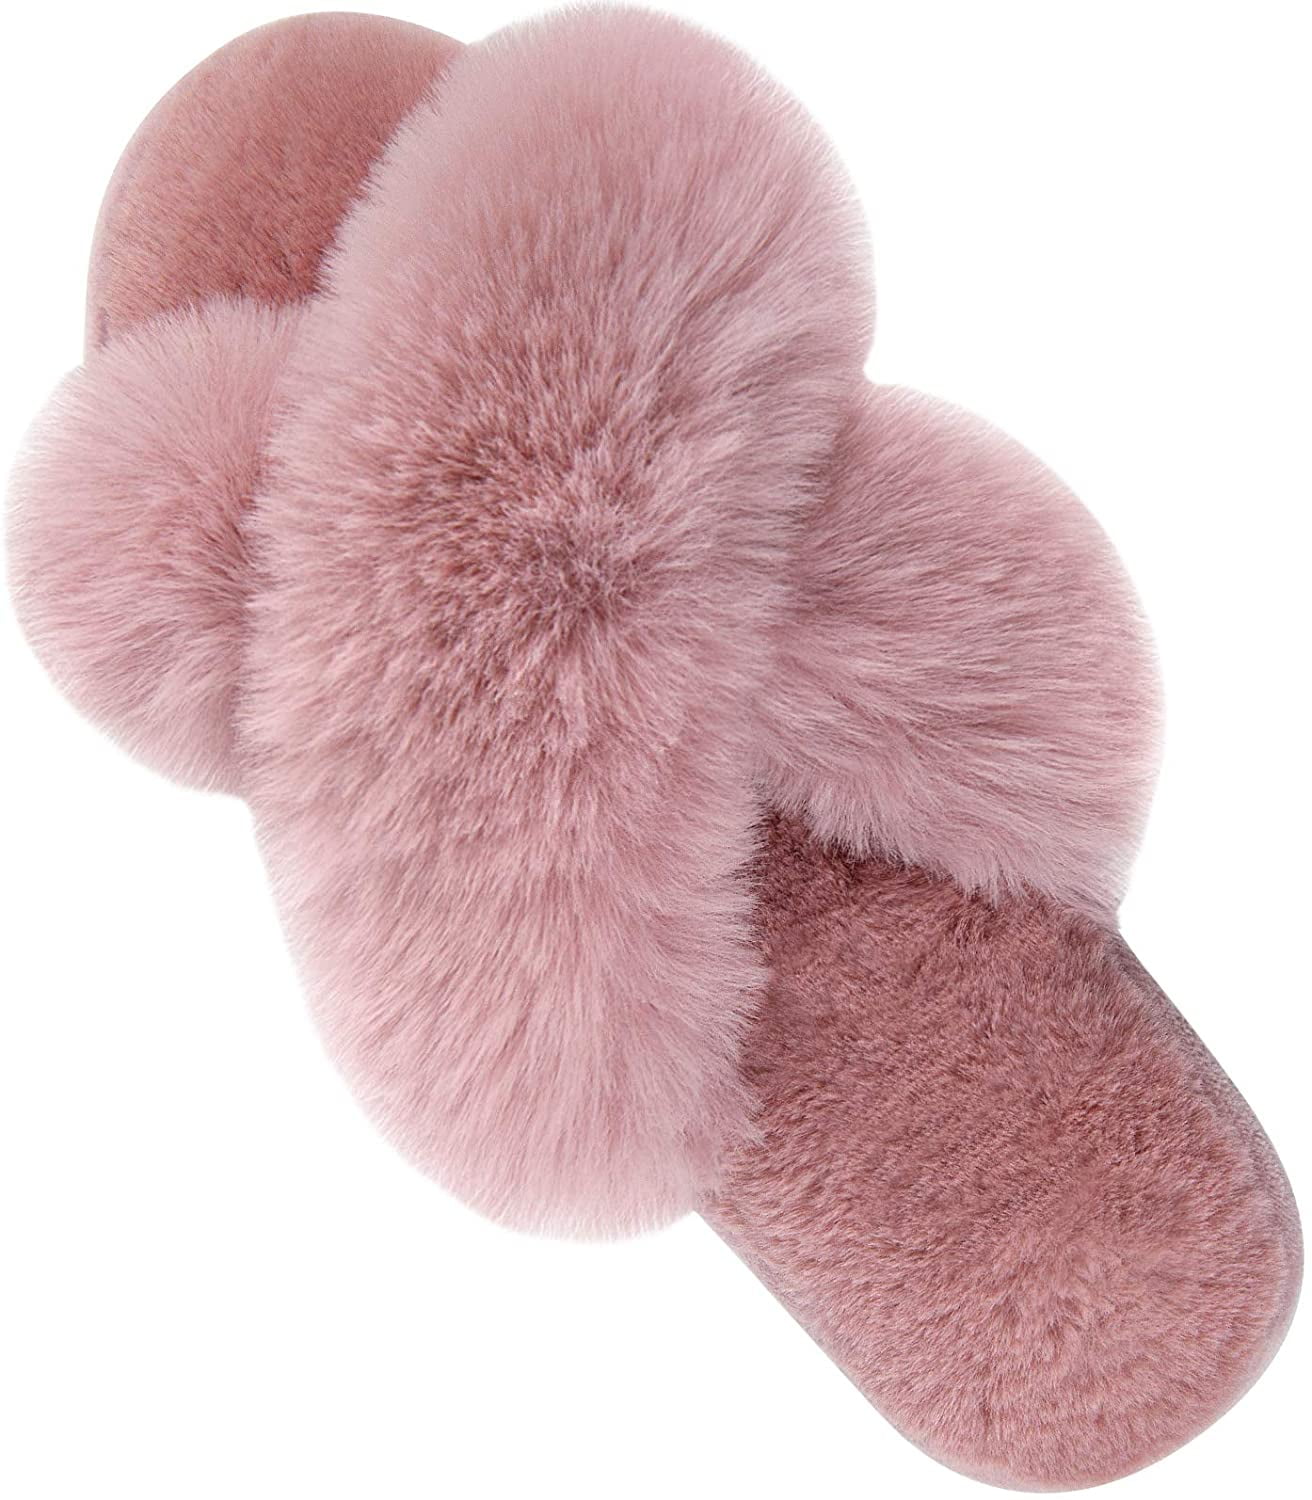 Womens Faux Fur Slippers Plush Fuzzy Soft Slip On House Slippers 